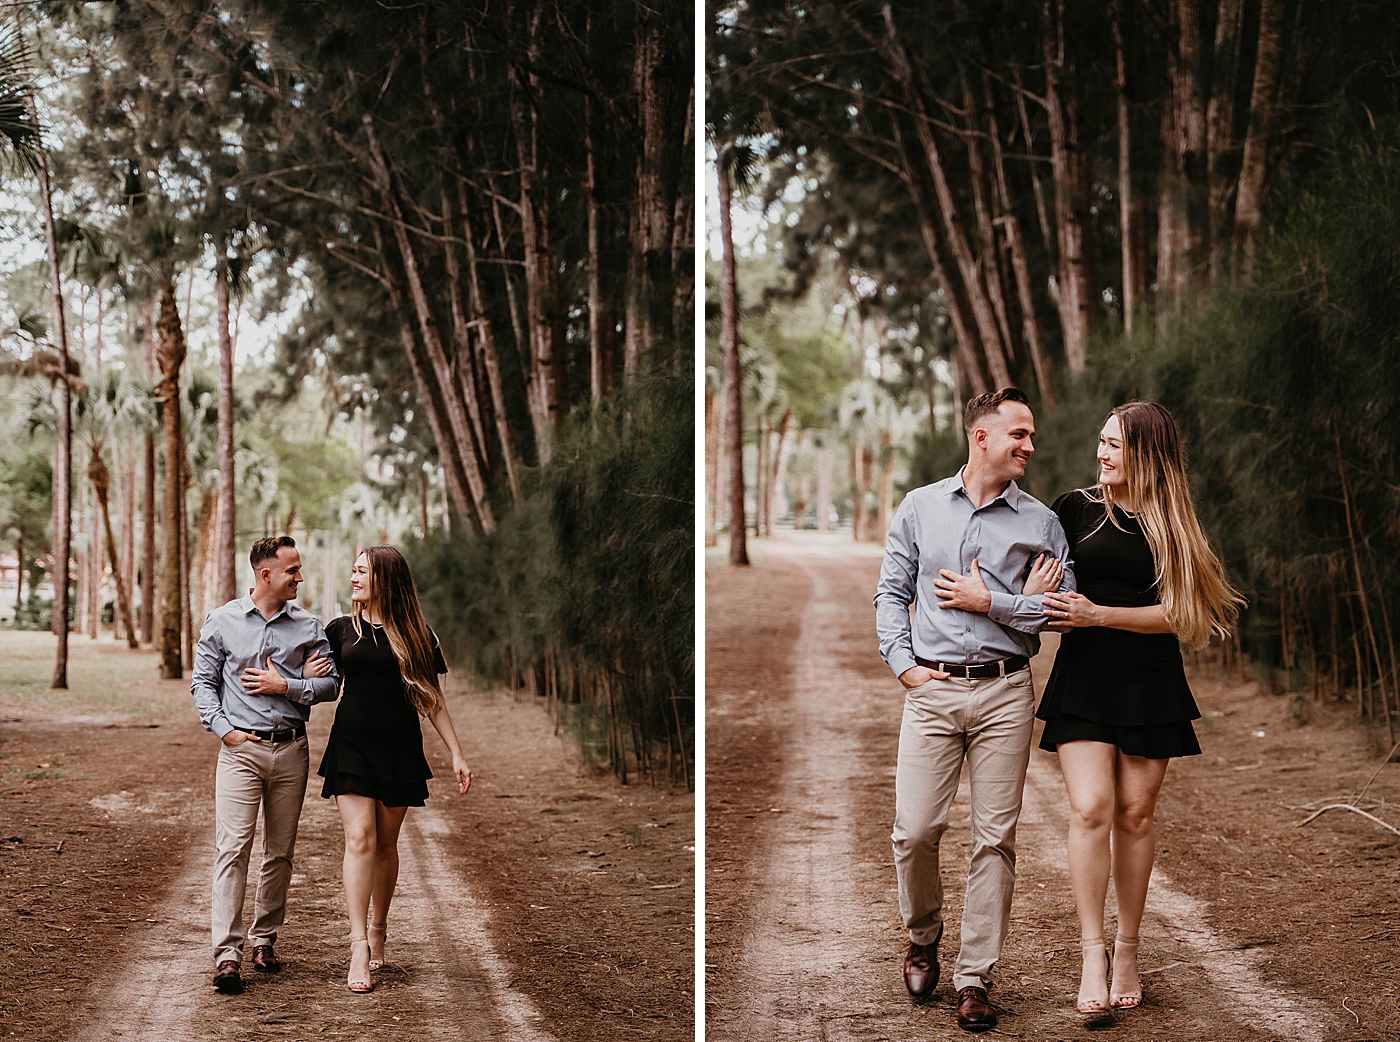 Couple arm in arm walking on dirt trail Rustic South Florida Engagement Photography captured by South Florida Engagement Photographer Krystal Capone Photography 